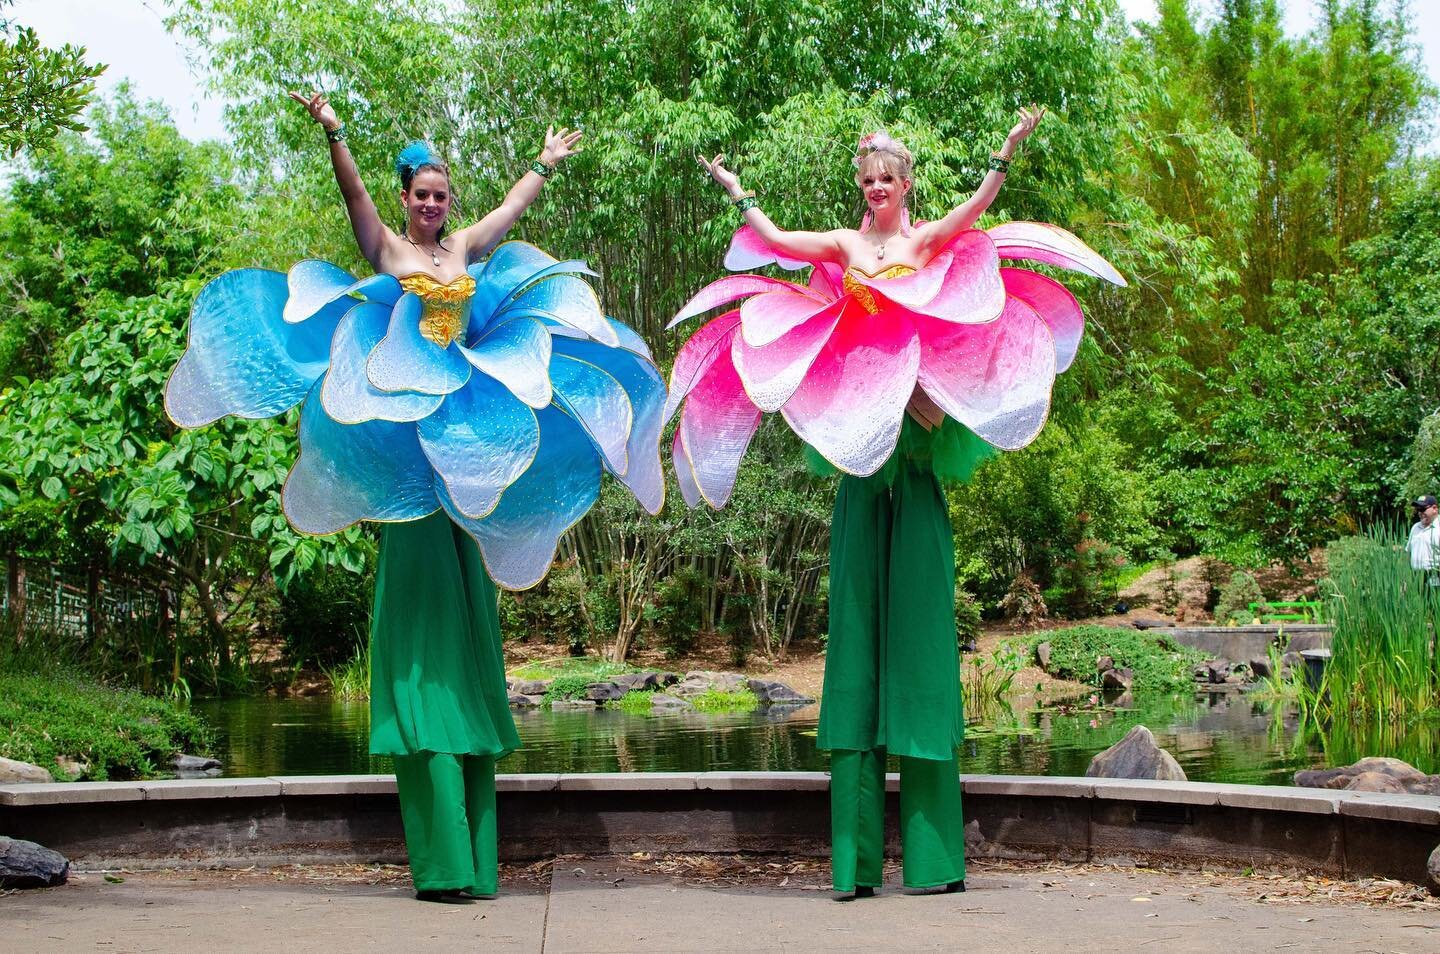 Stilt walking flowers!!! Some pictures from our recent Art in the garden zoo festival #stiltwalkers #jacksonvillezoo #artinthegarden @jacksonvillezoo #stilts #circus #circuseverydamnday 
Thank you once again for having @kristen_sparrow_circus at your